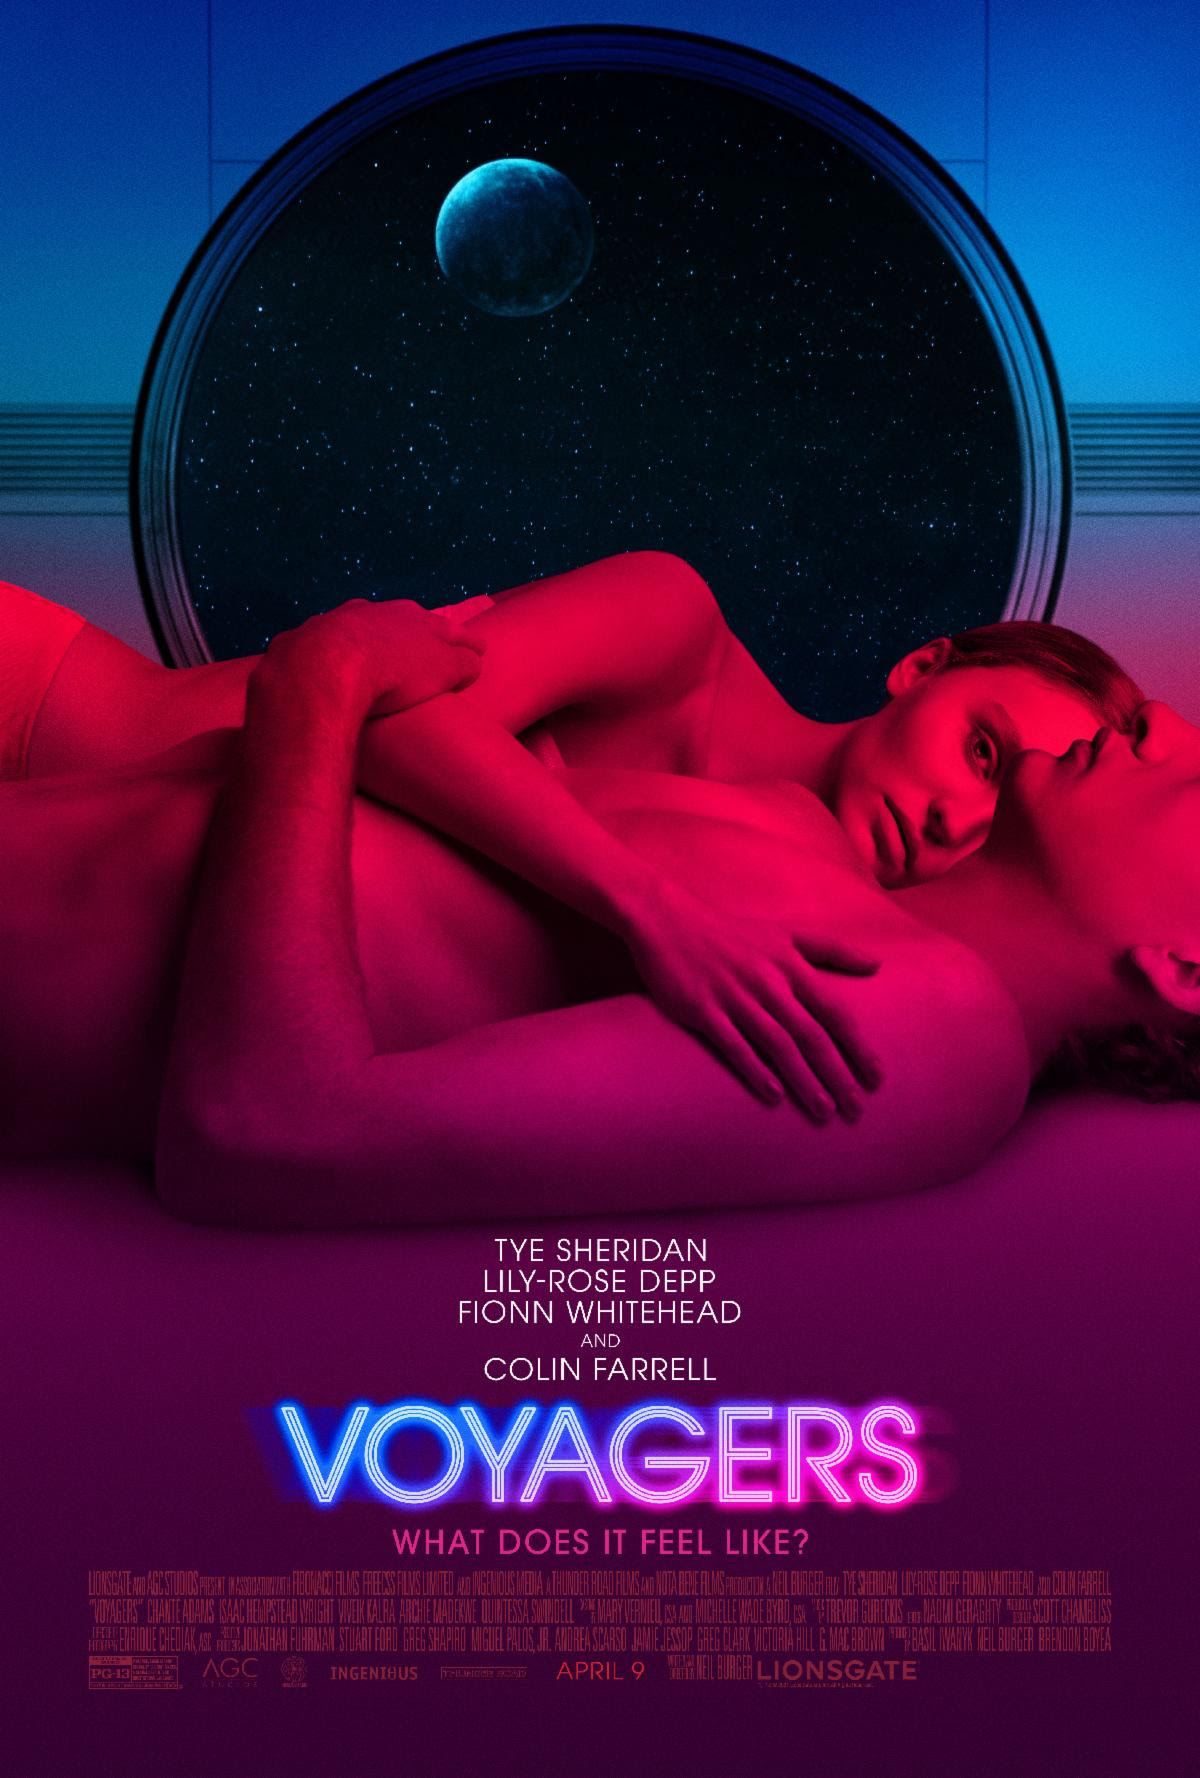 [News] VOYAGERS - Things Are Not What They Seem in Latest Trailer